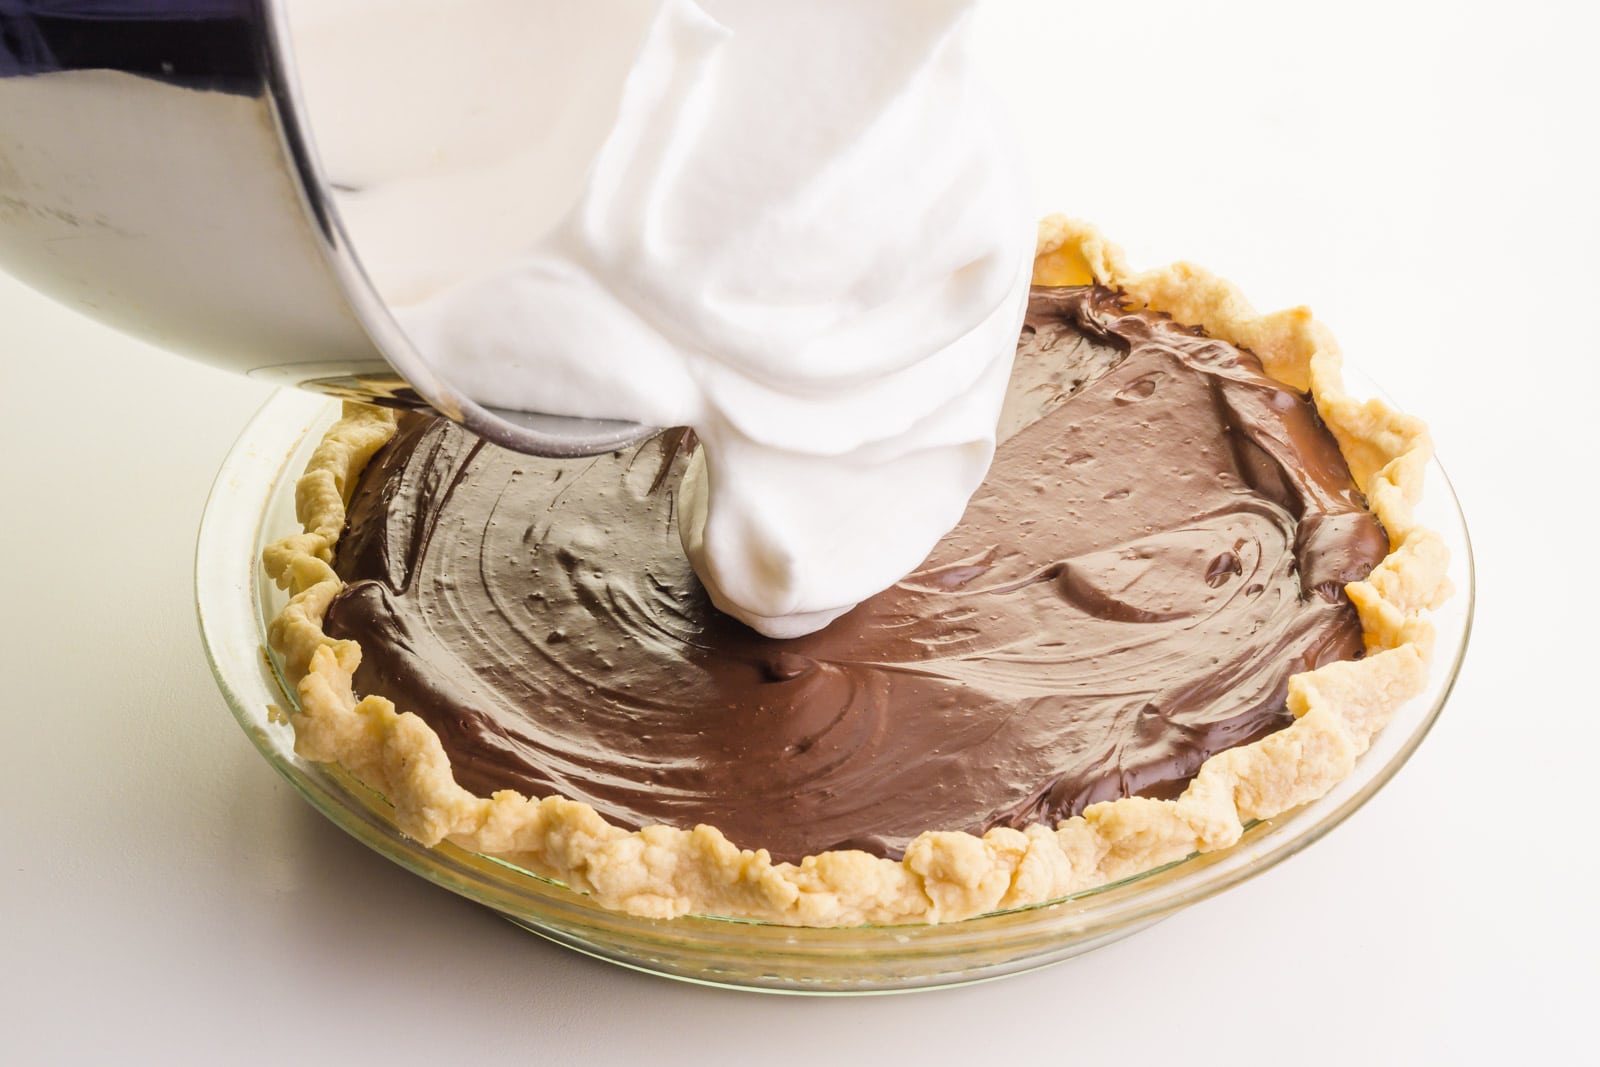 Vegan meringue is being poured from a mixing bowl onto a chocolate pie.